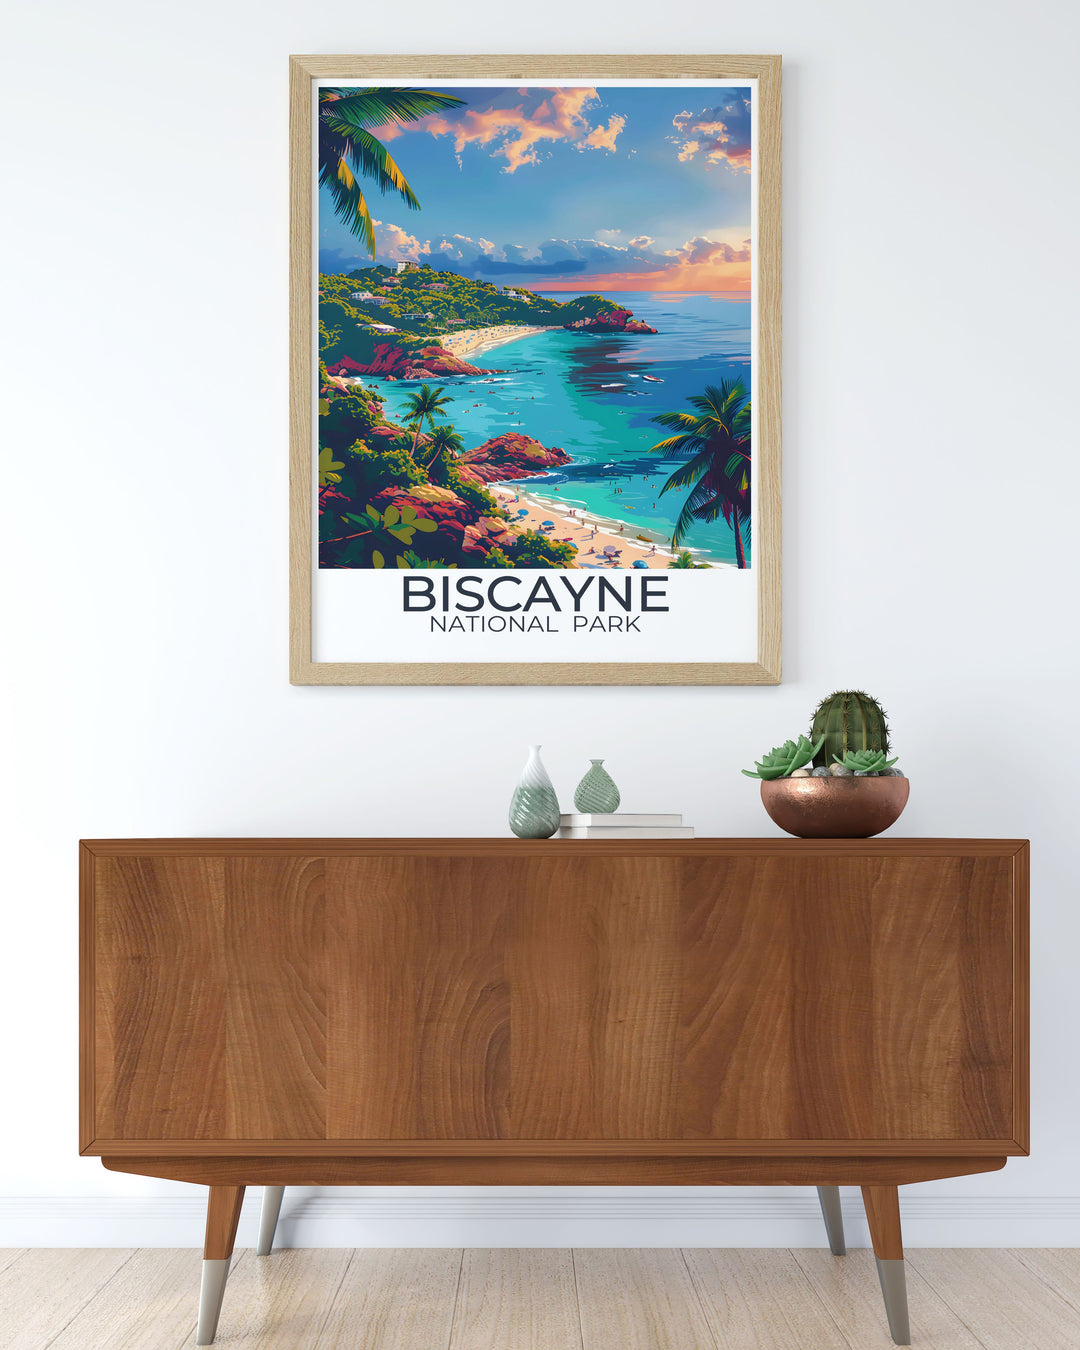 High quality print of Elliot Key Trail and coral reefs in Biscayne National Park, capturing the stunning landscapes and marine life of this unique area. Ideal for art lovers who appreciate both nature and adventure.